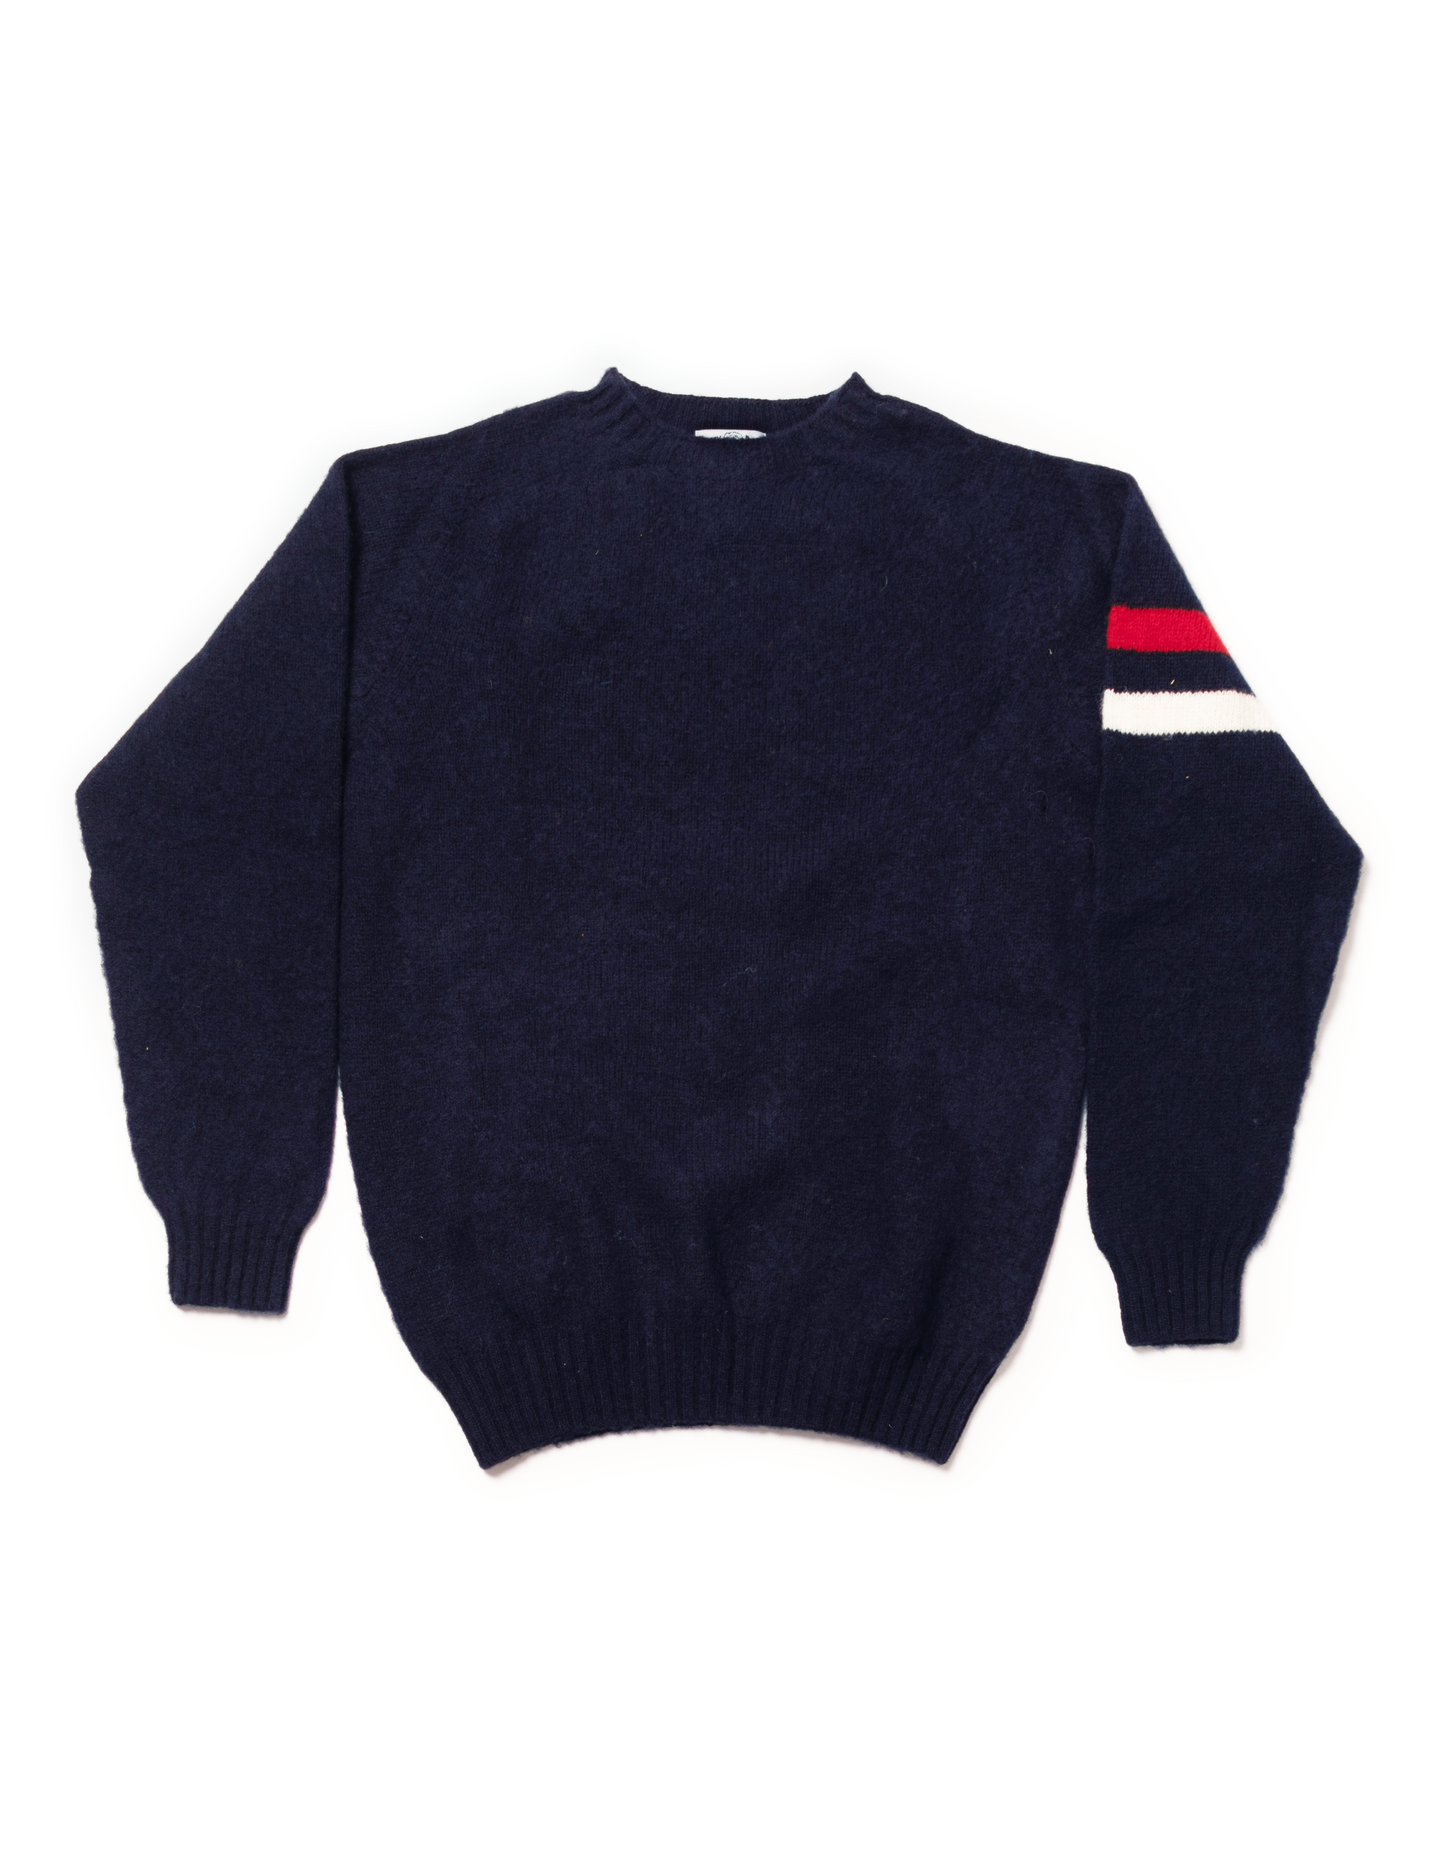 Shaggy Dog Sweater Navy Two Color Rings - Trim Fit | J.PRESS - Pennant ...